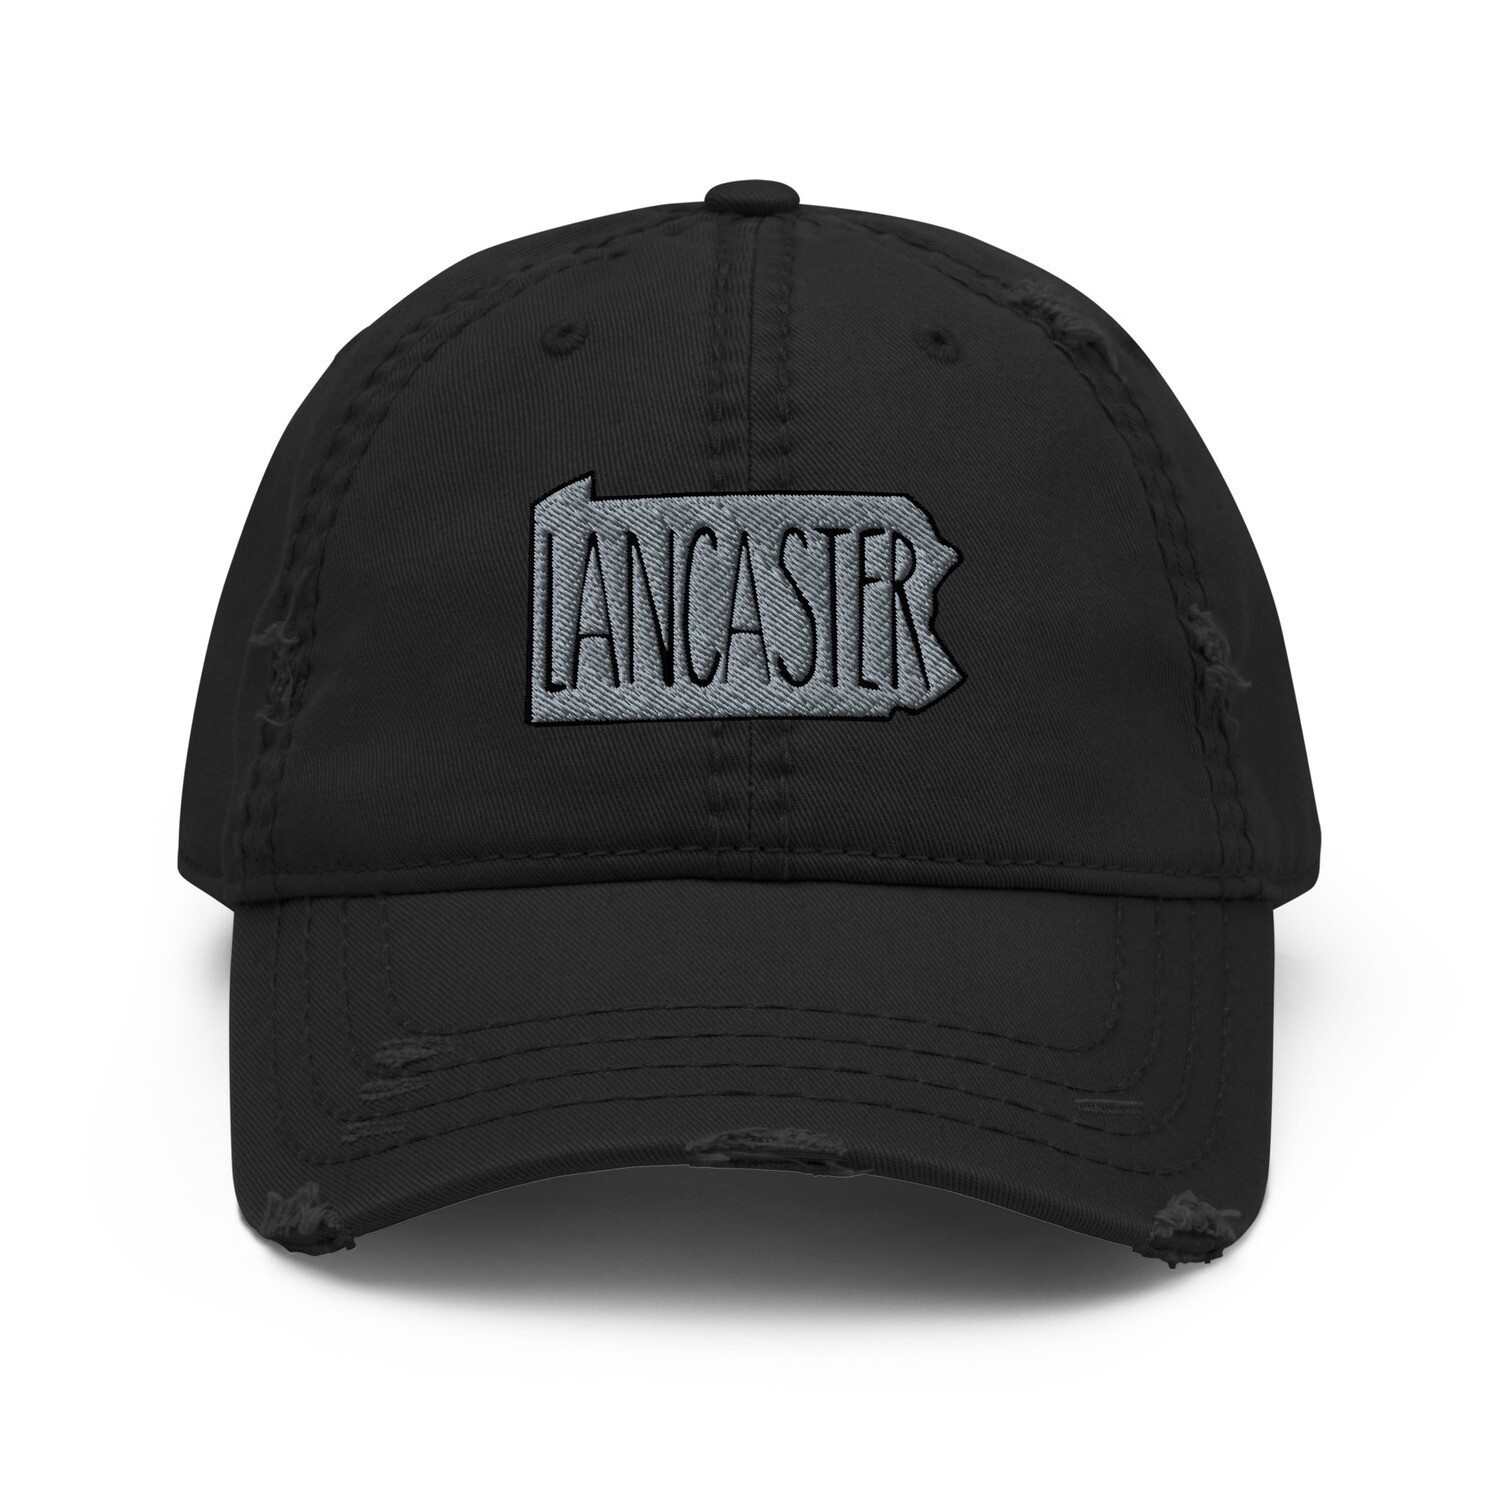 Lancaster PA Embroidered Distressed Dad Hat